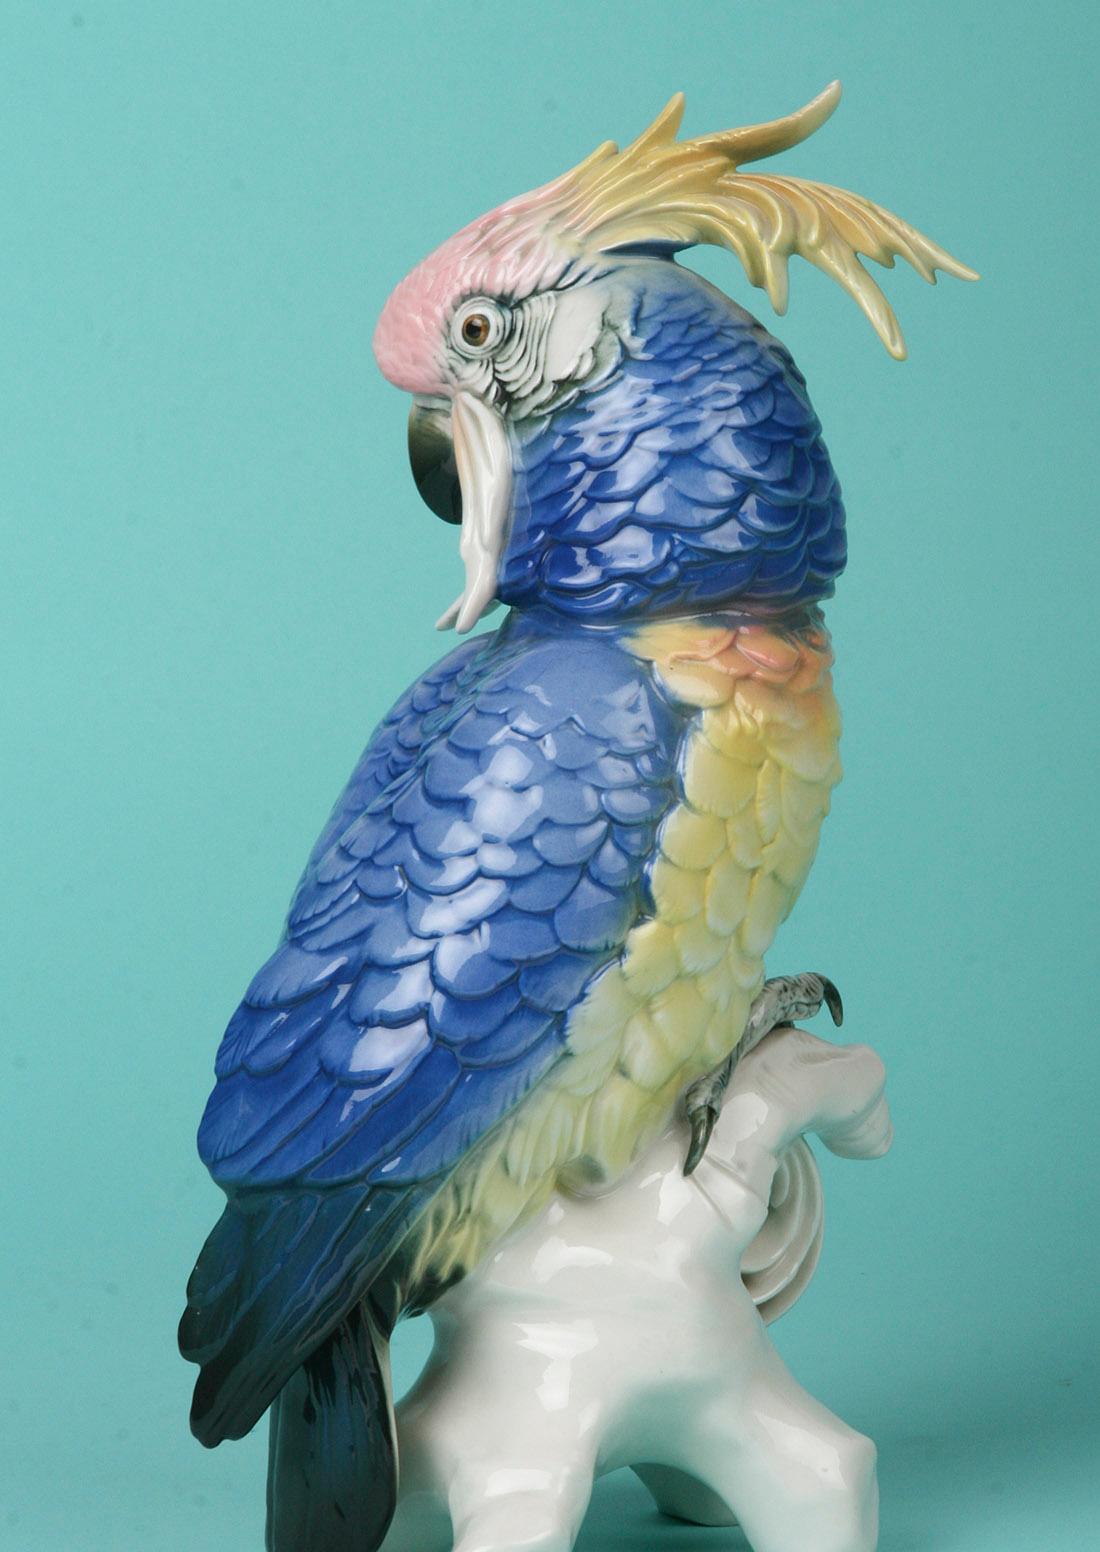 Hand-Painted Karl Ens Porcelain Statue of a Parrot, Early 19th Century